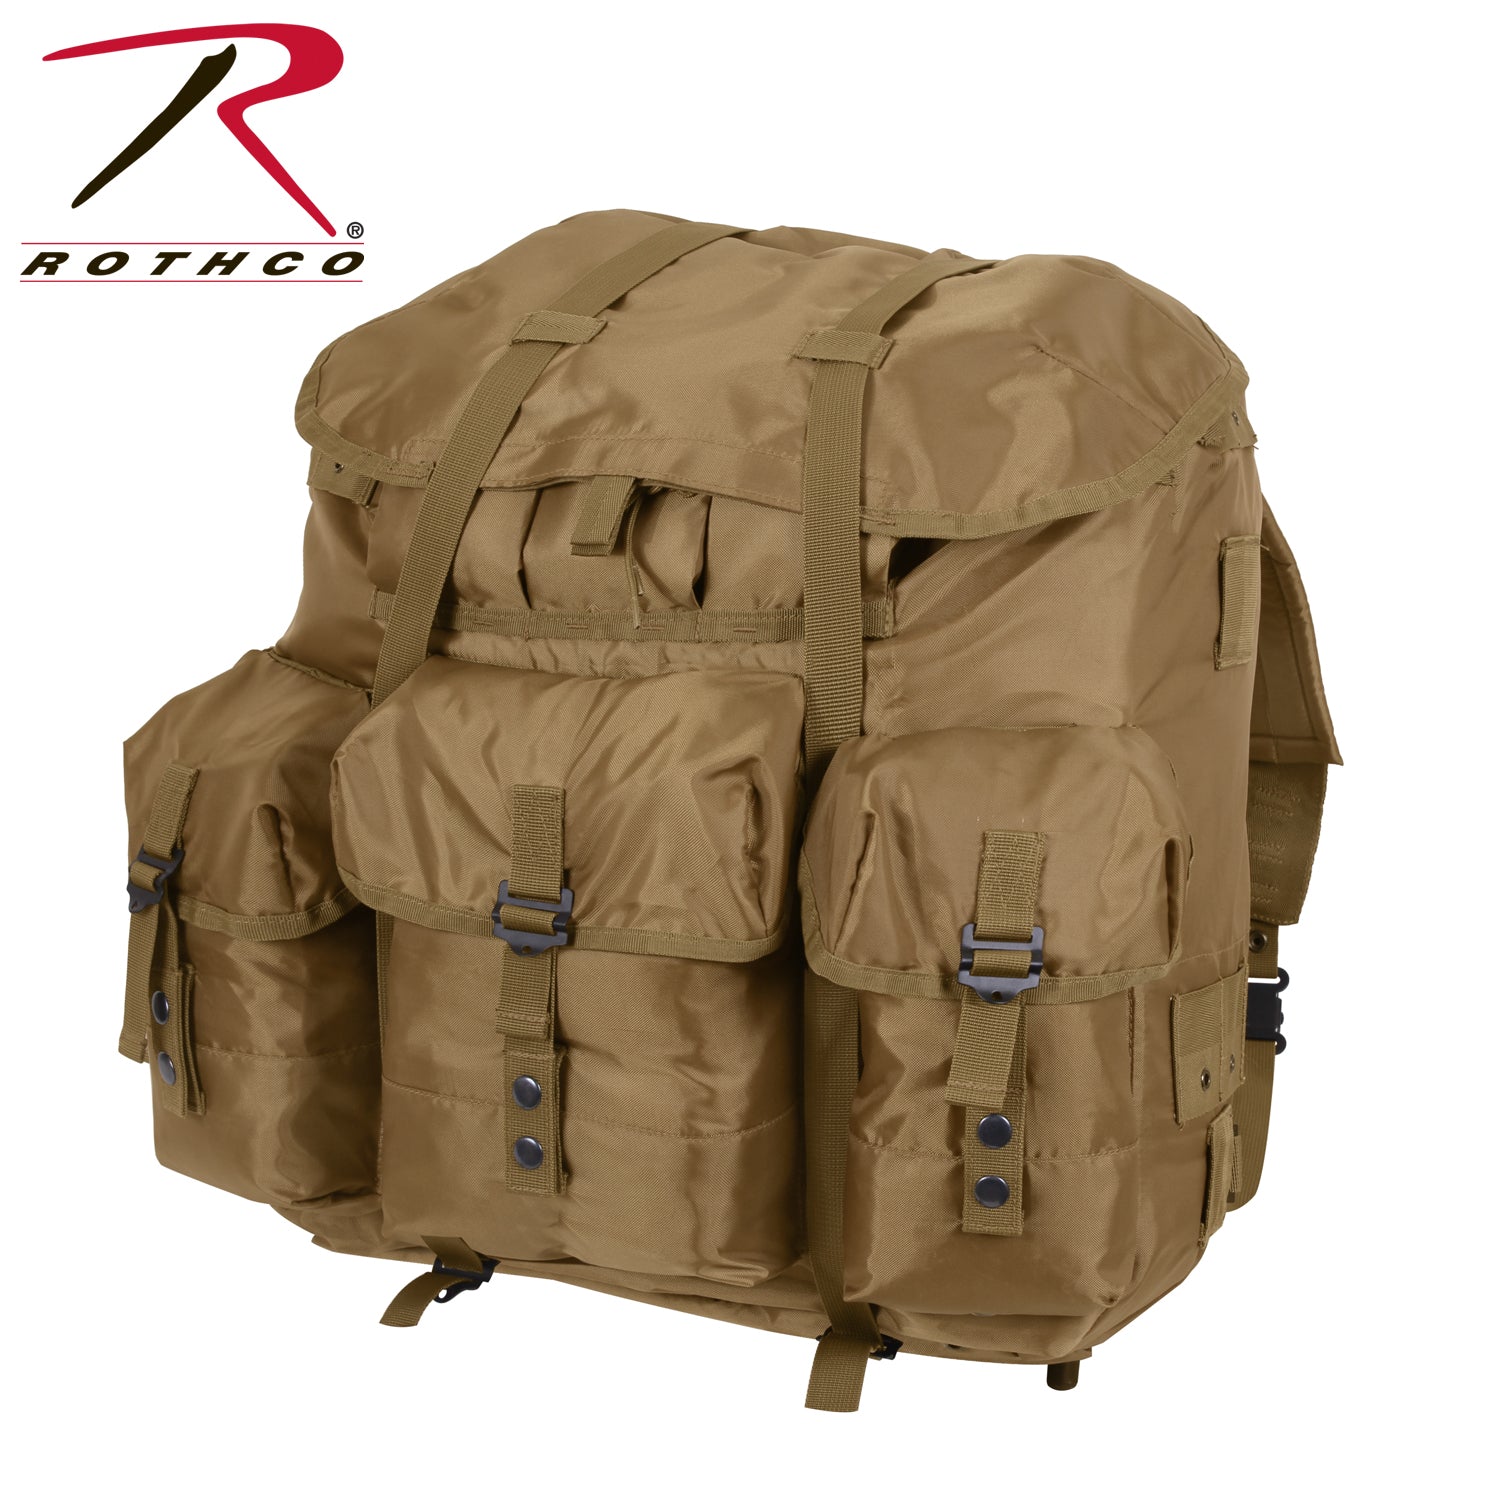 Rothco G.I. Type Large Alice Pack